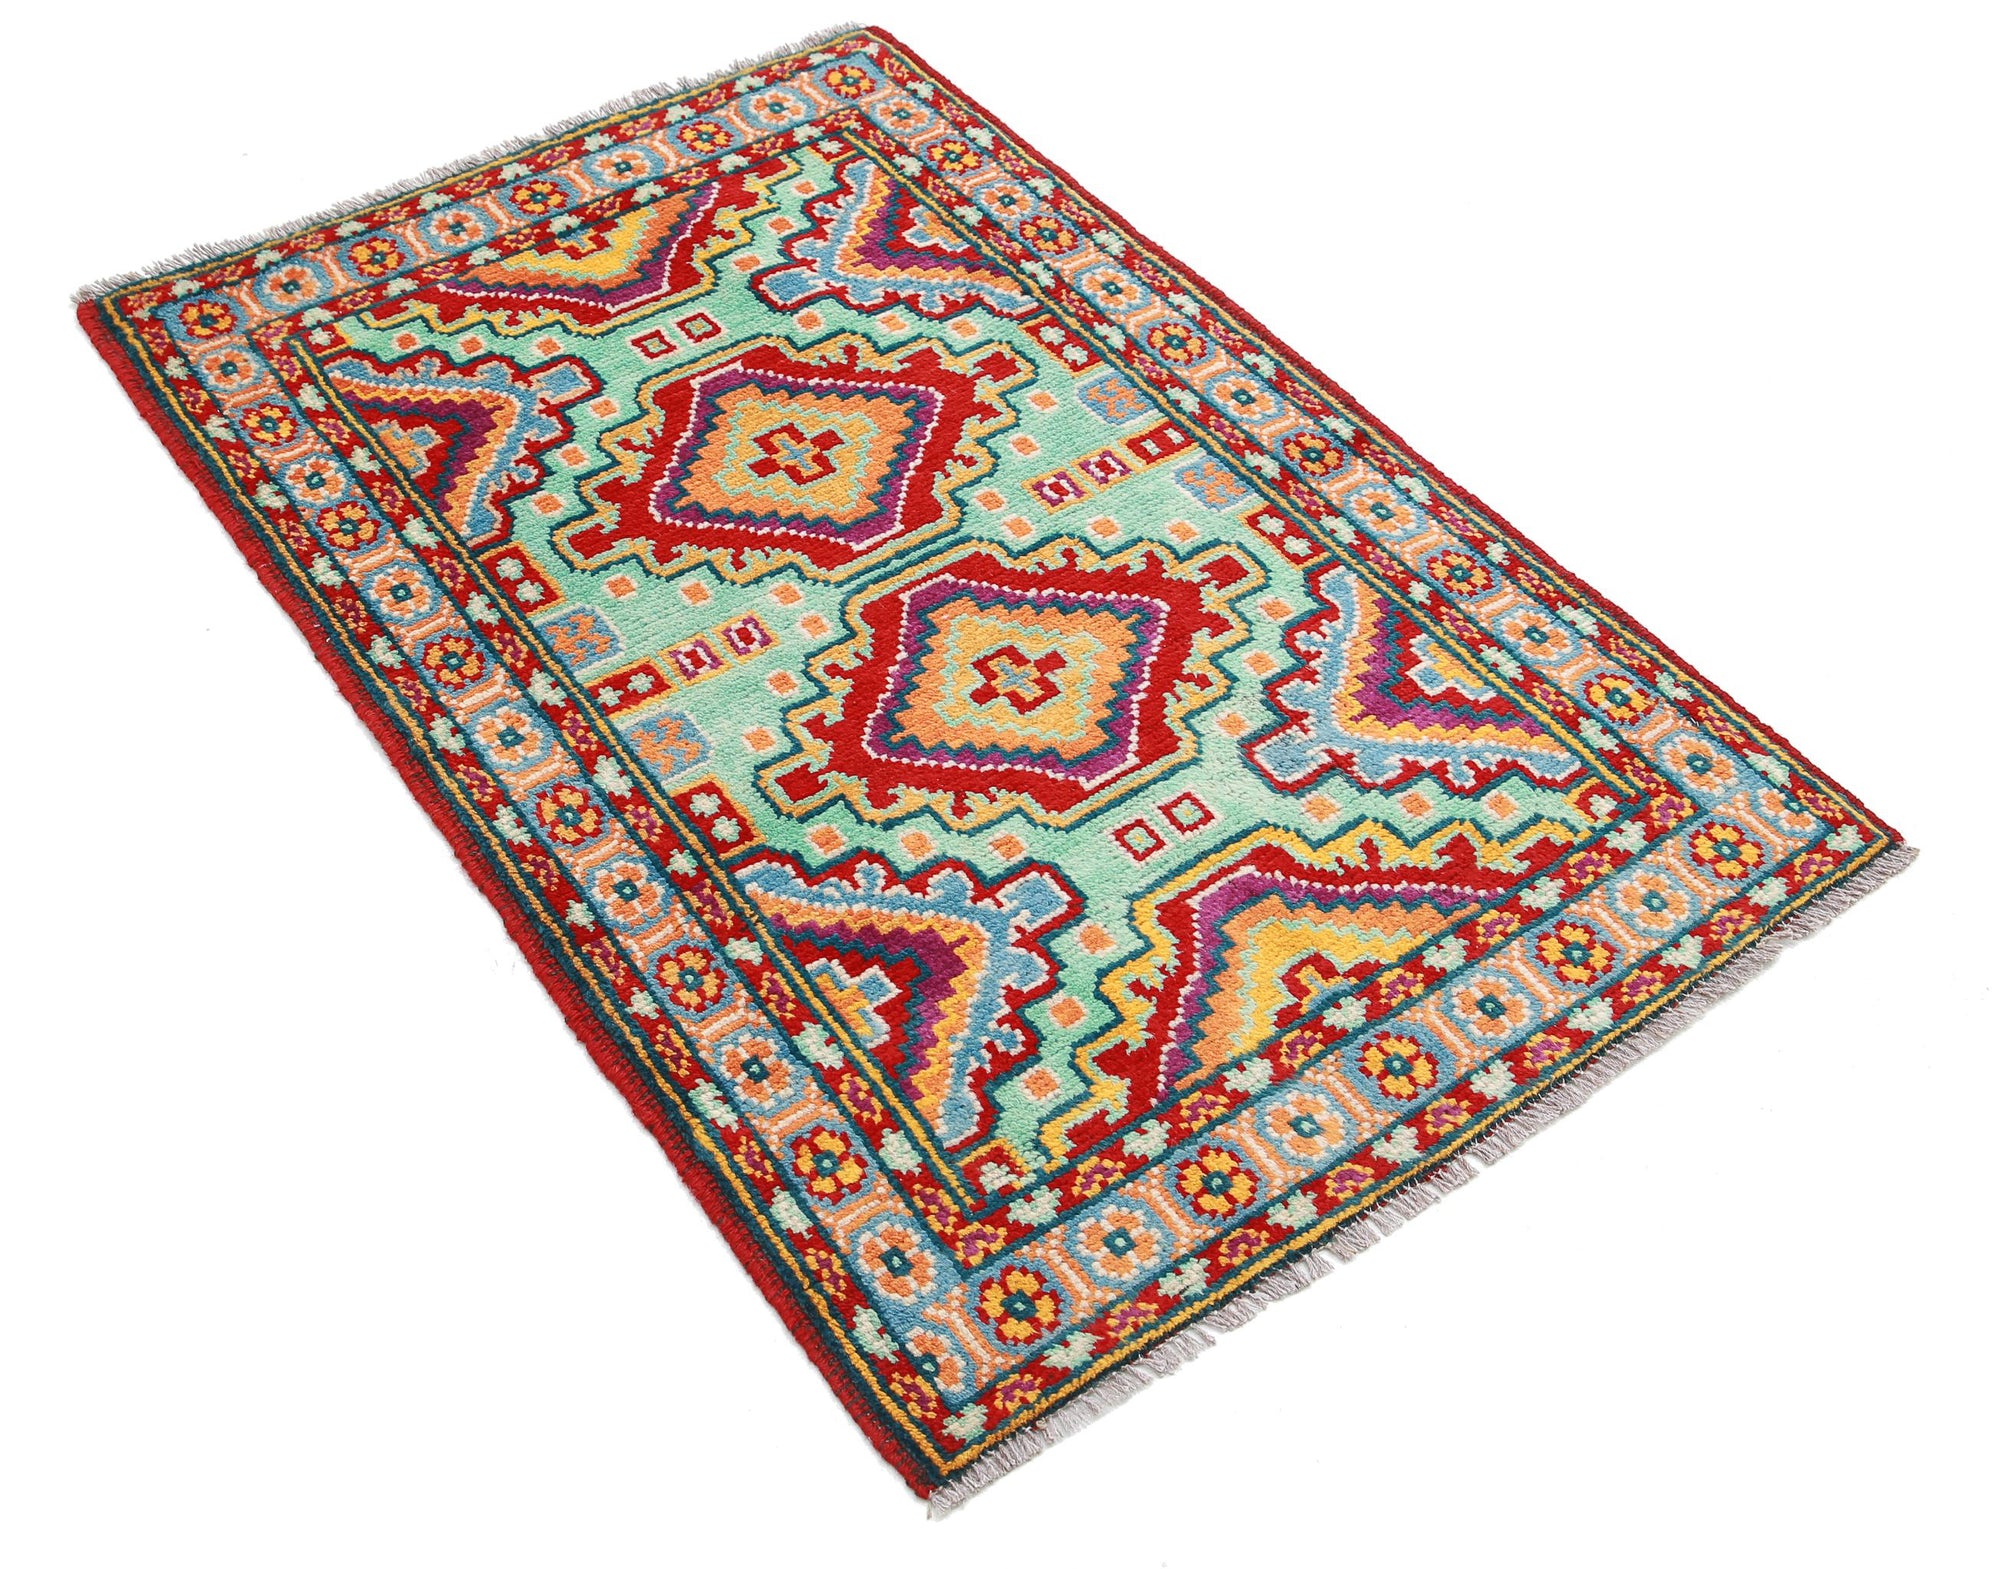 Revival-hand-knotted-qarghani-wool-rug-5014196-1.jpg